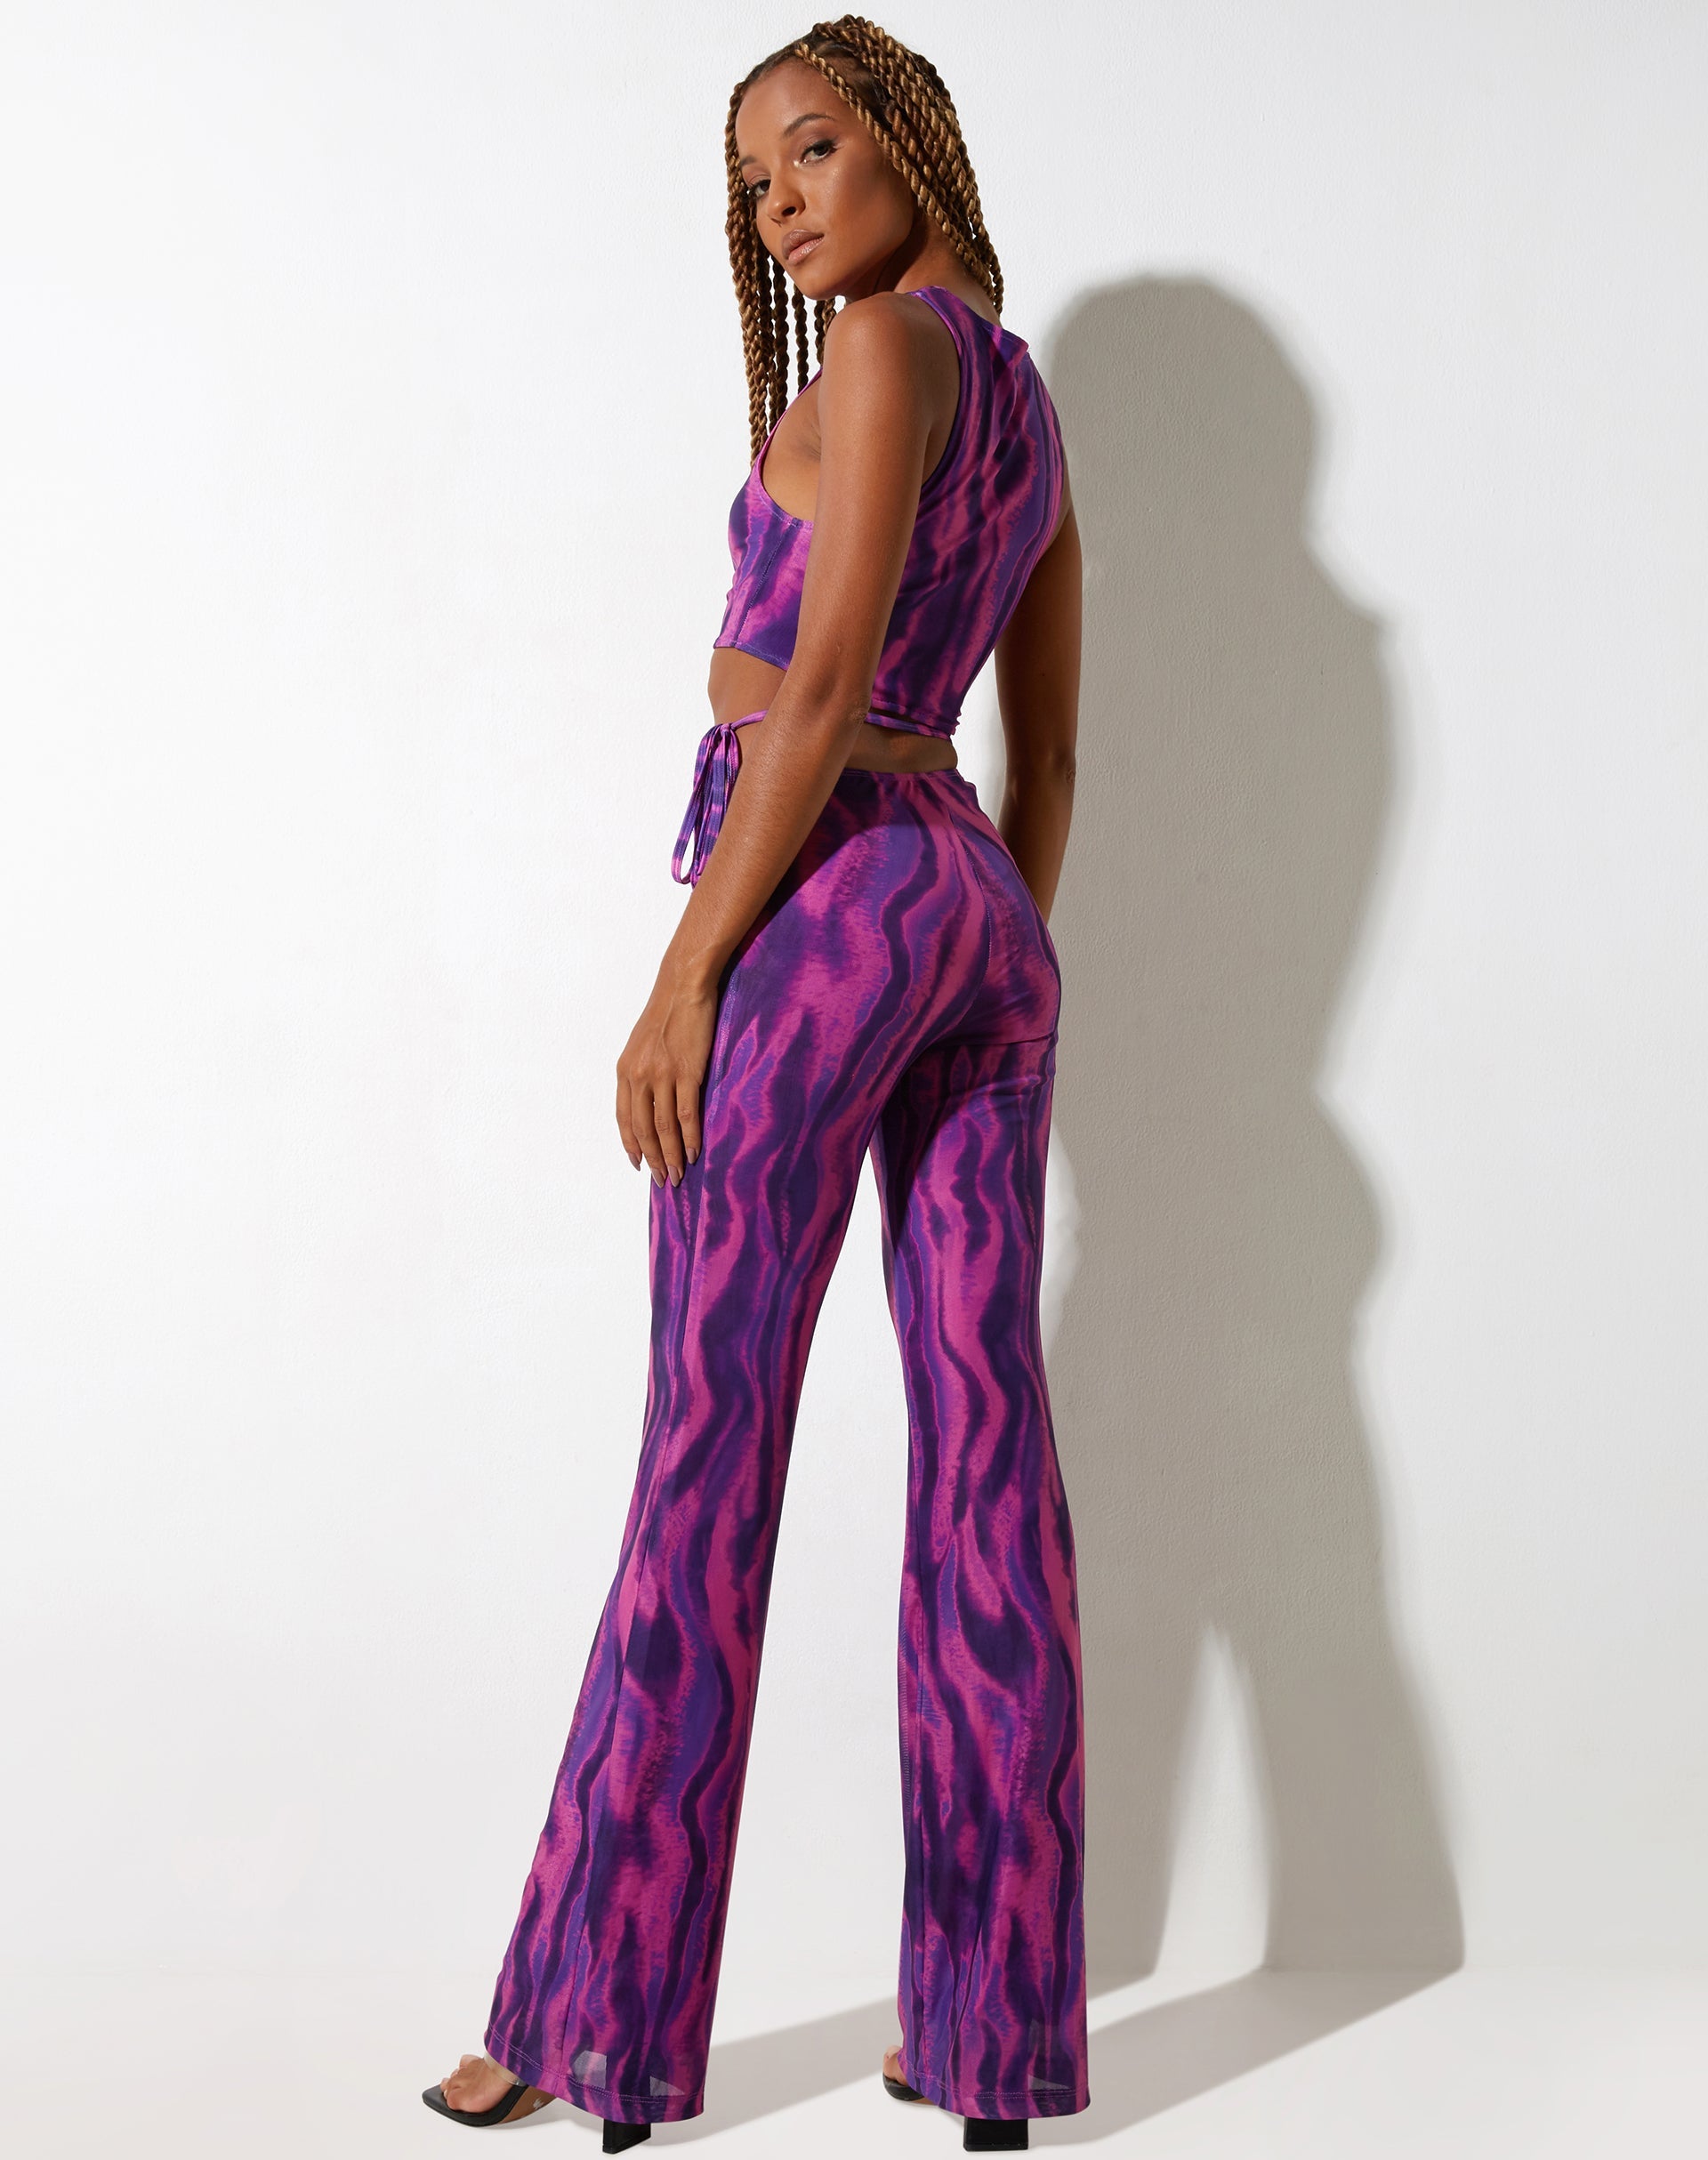 image of Eda Trouser in  Tropical Rave Pink